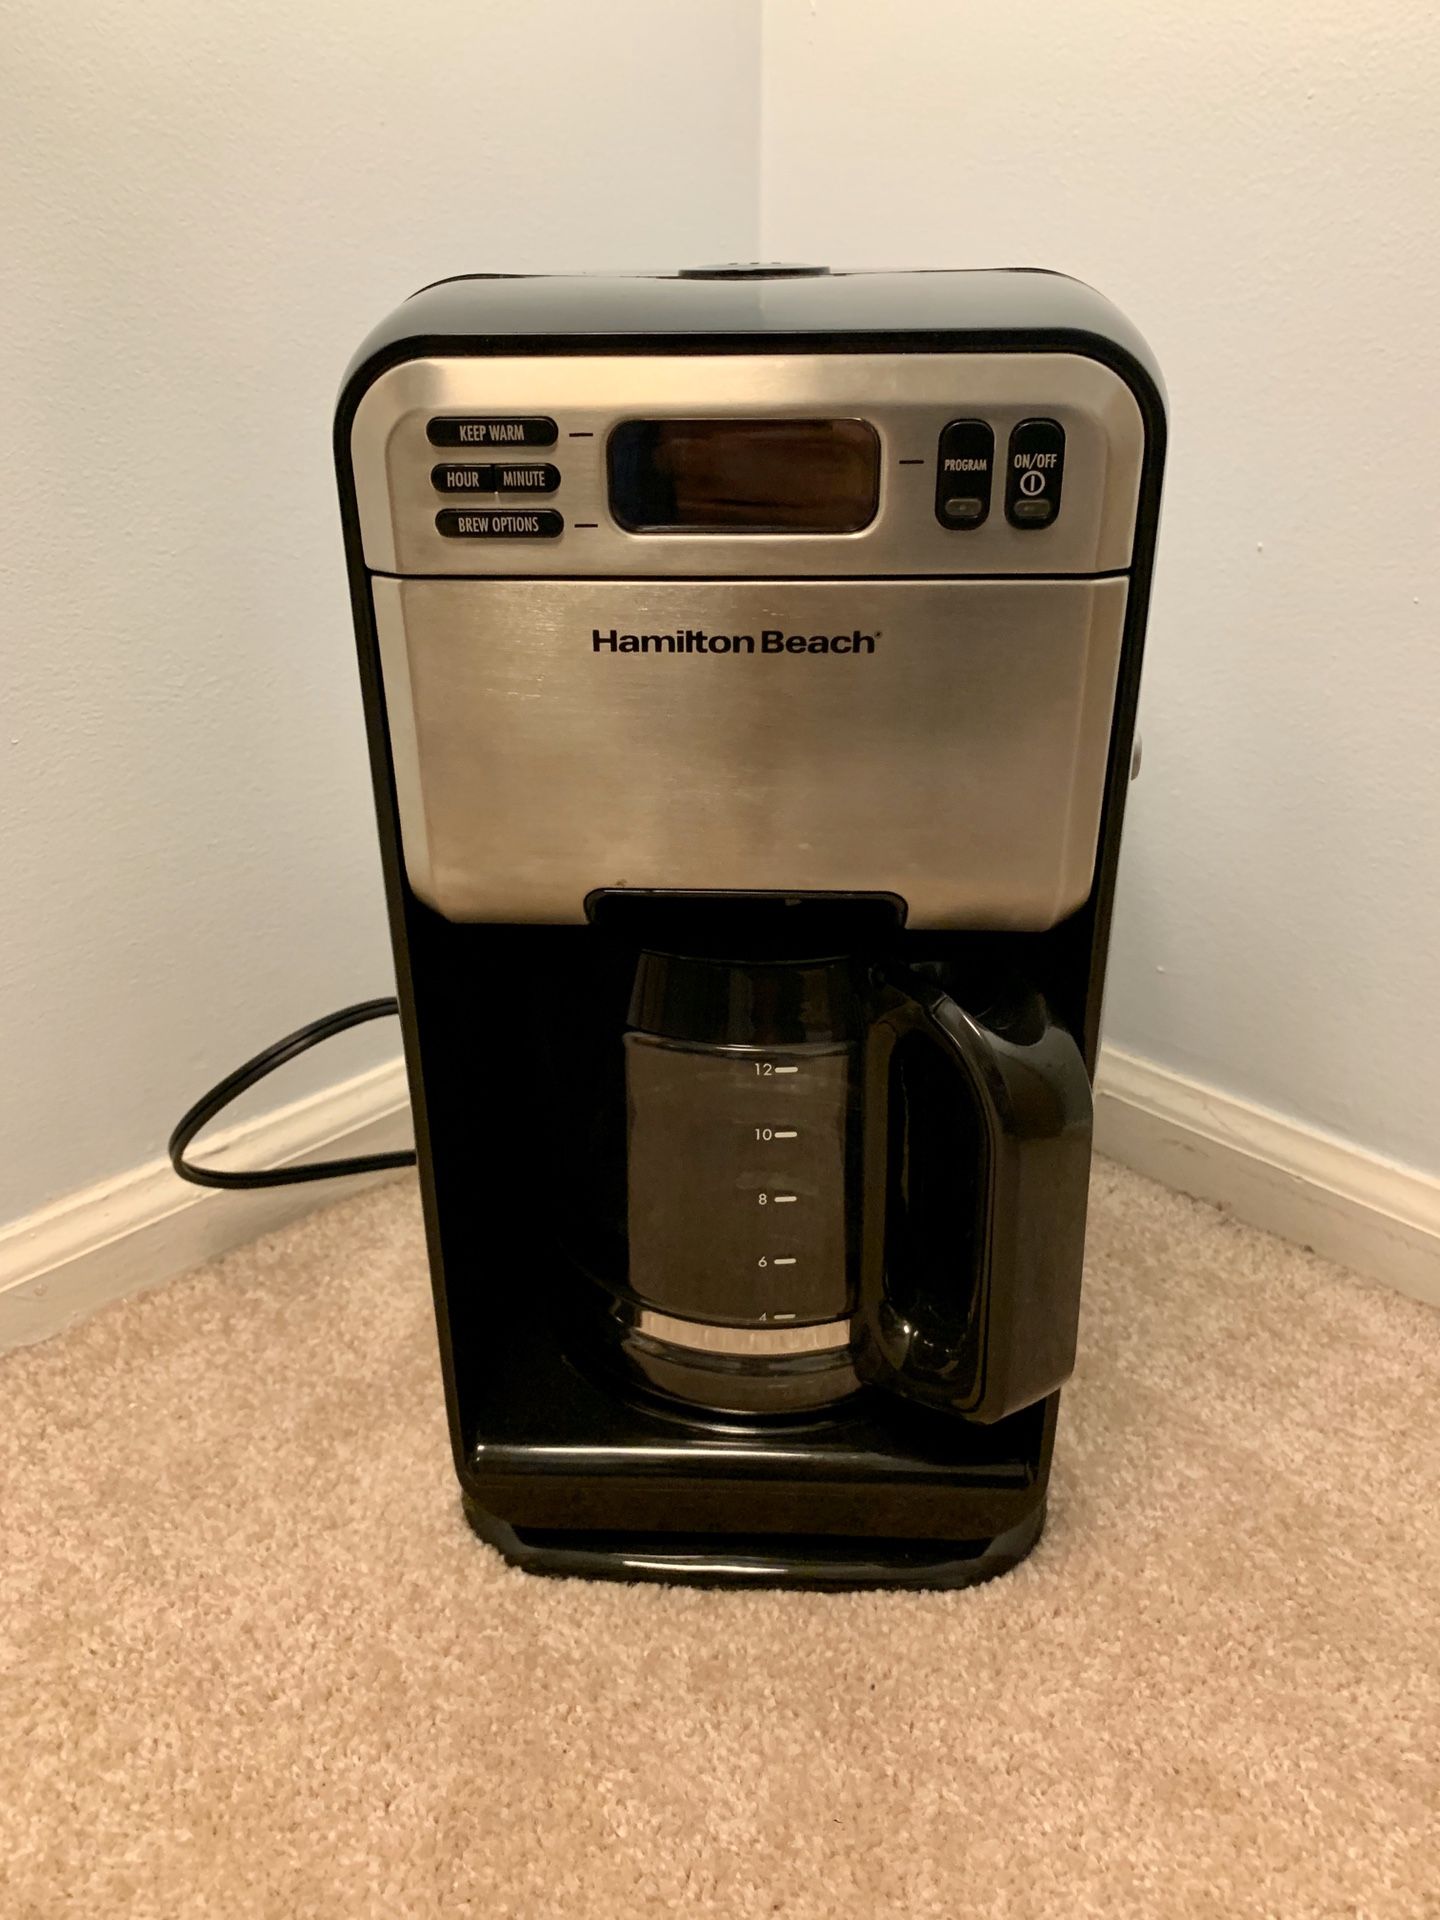 Stainless Steel 12-Cup Coffee Maker